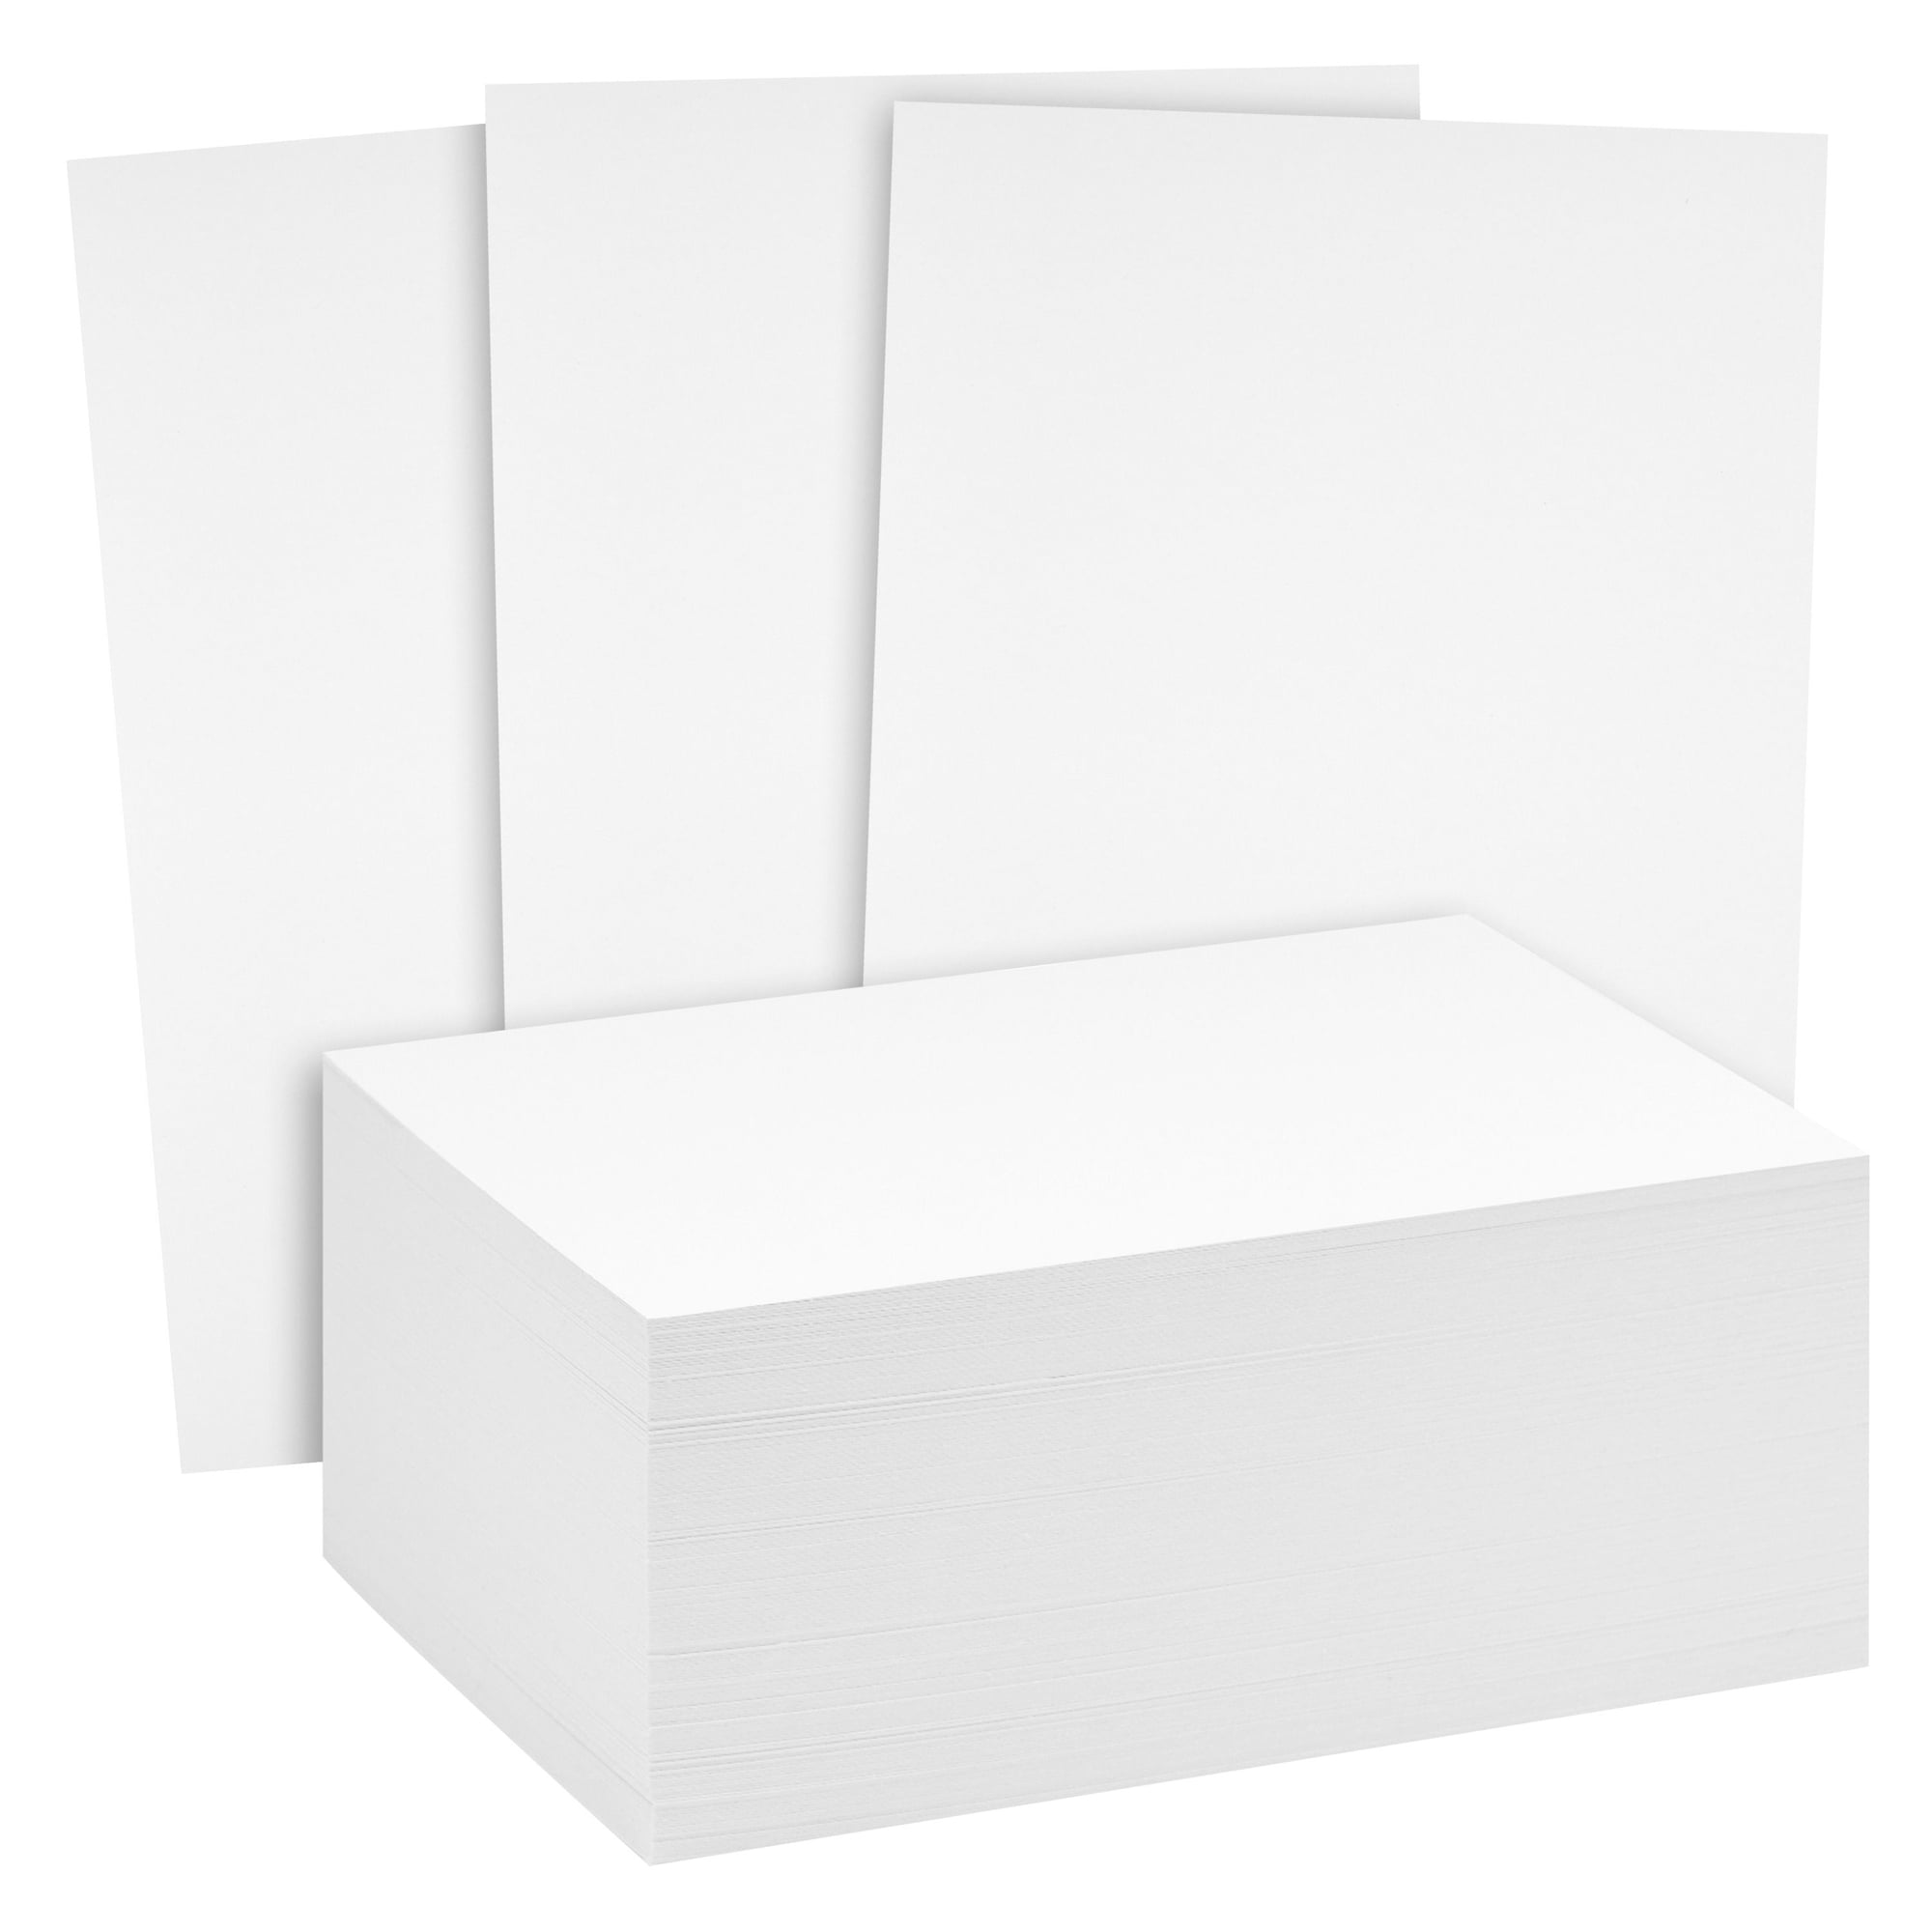 200-pack-5x7-cardstock-postcards-for-invitations-110-lb-cover-card